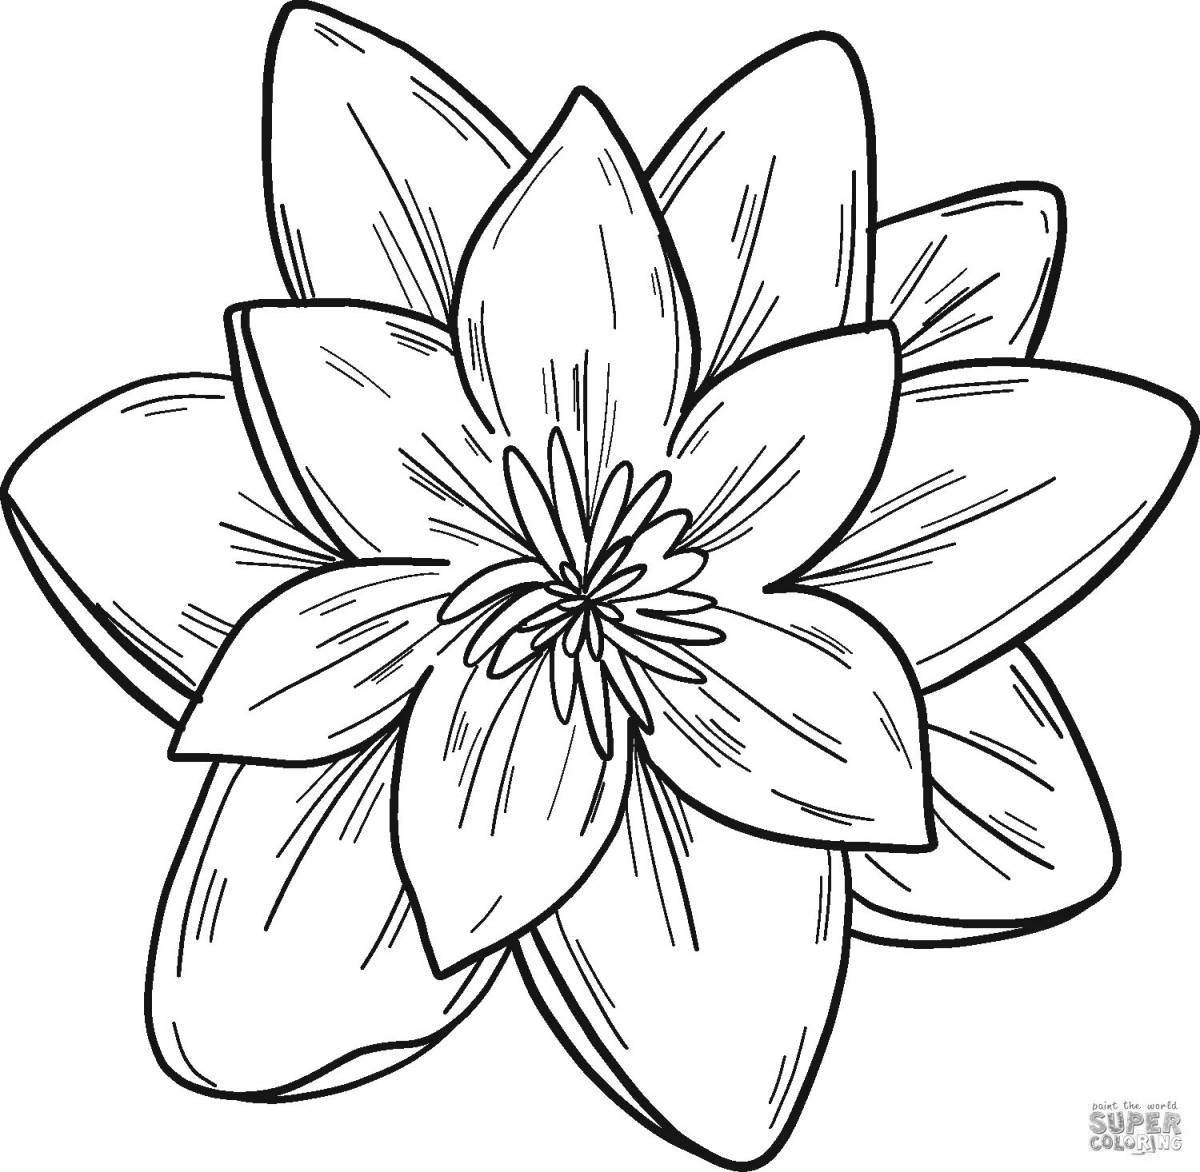 Shimmering lily coloring pages for kids